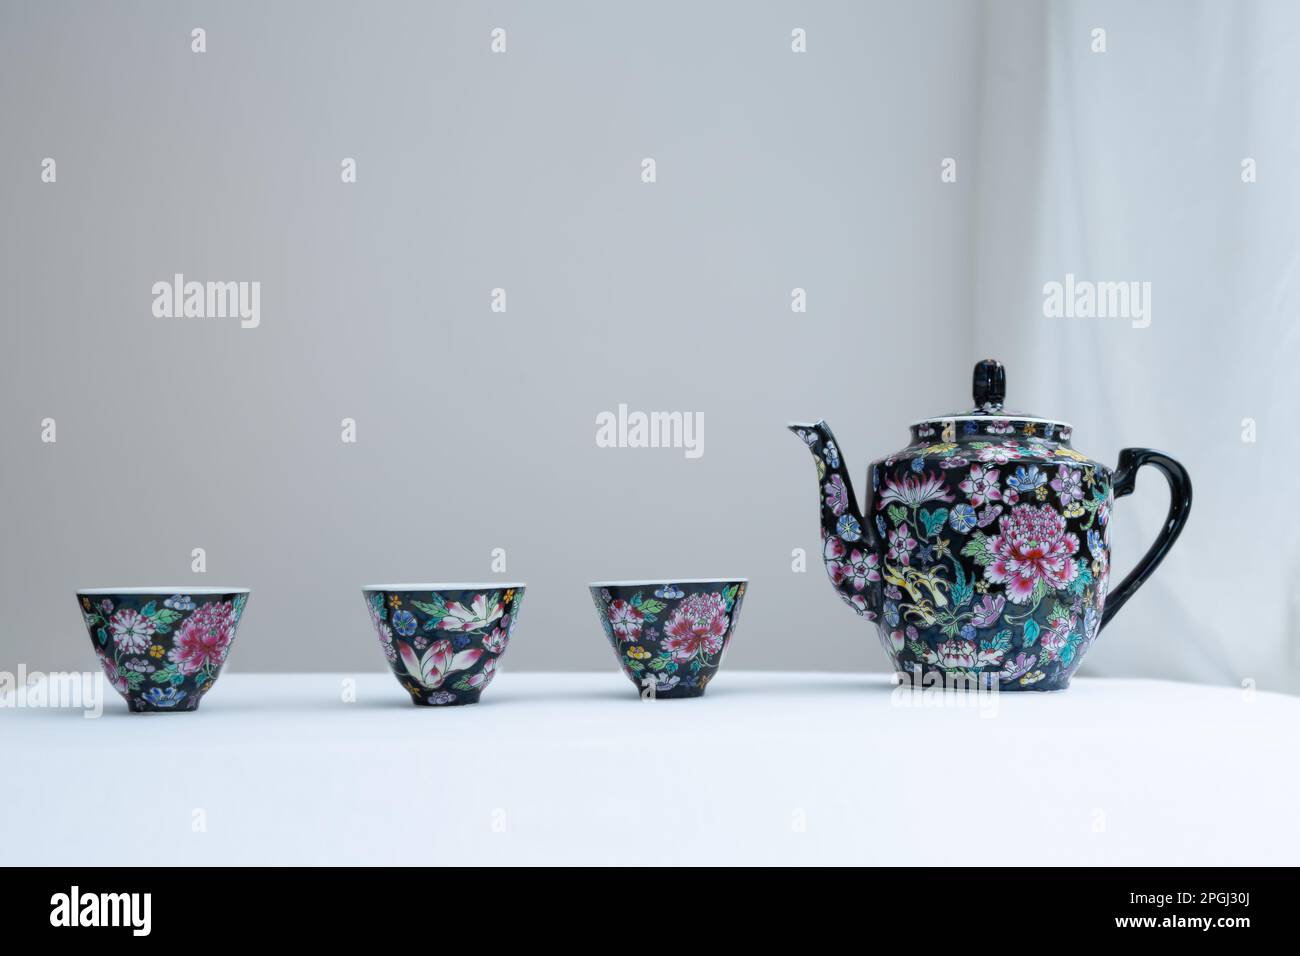 A Chinese teapot and three matching cups stand in a line on a white surface against a pale background suitable for text. Stock Photo